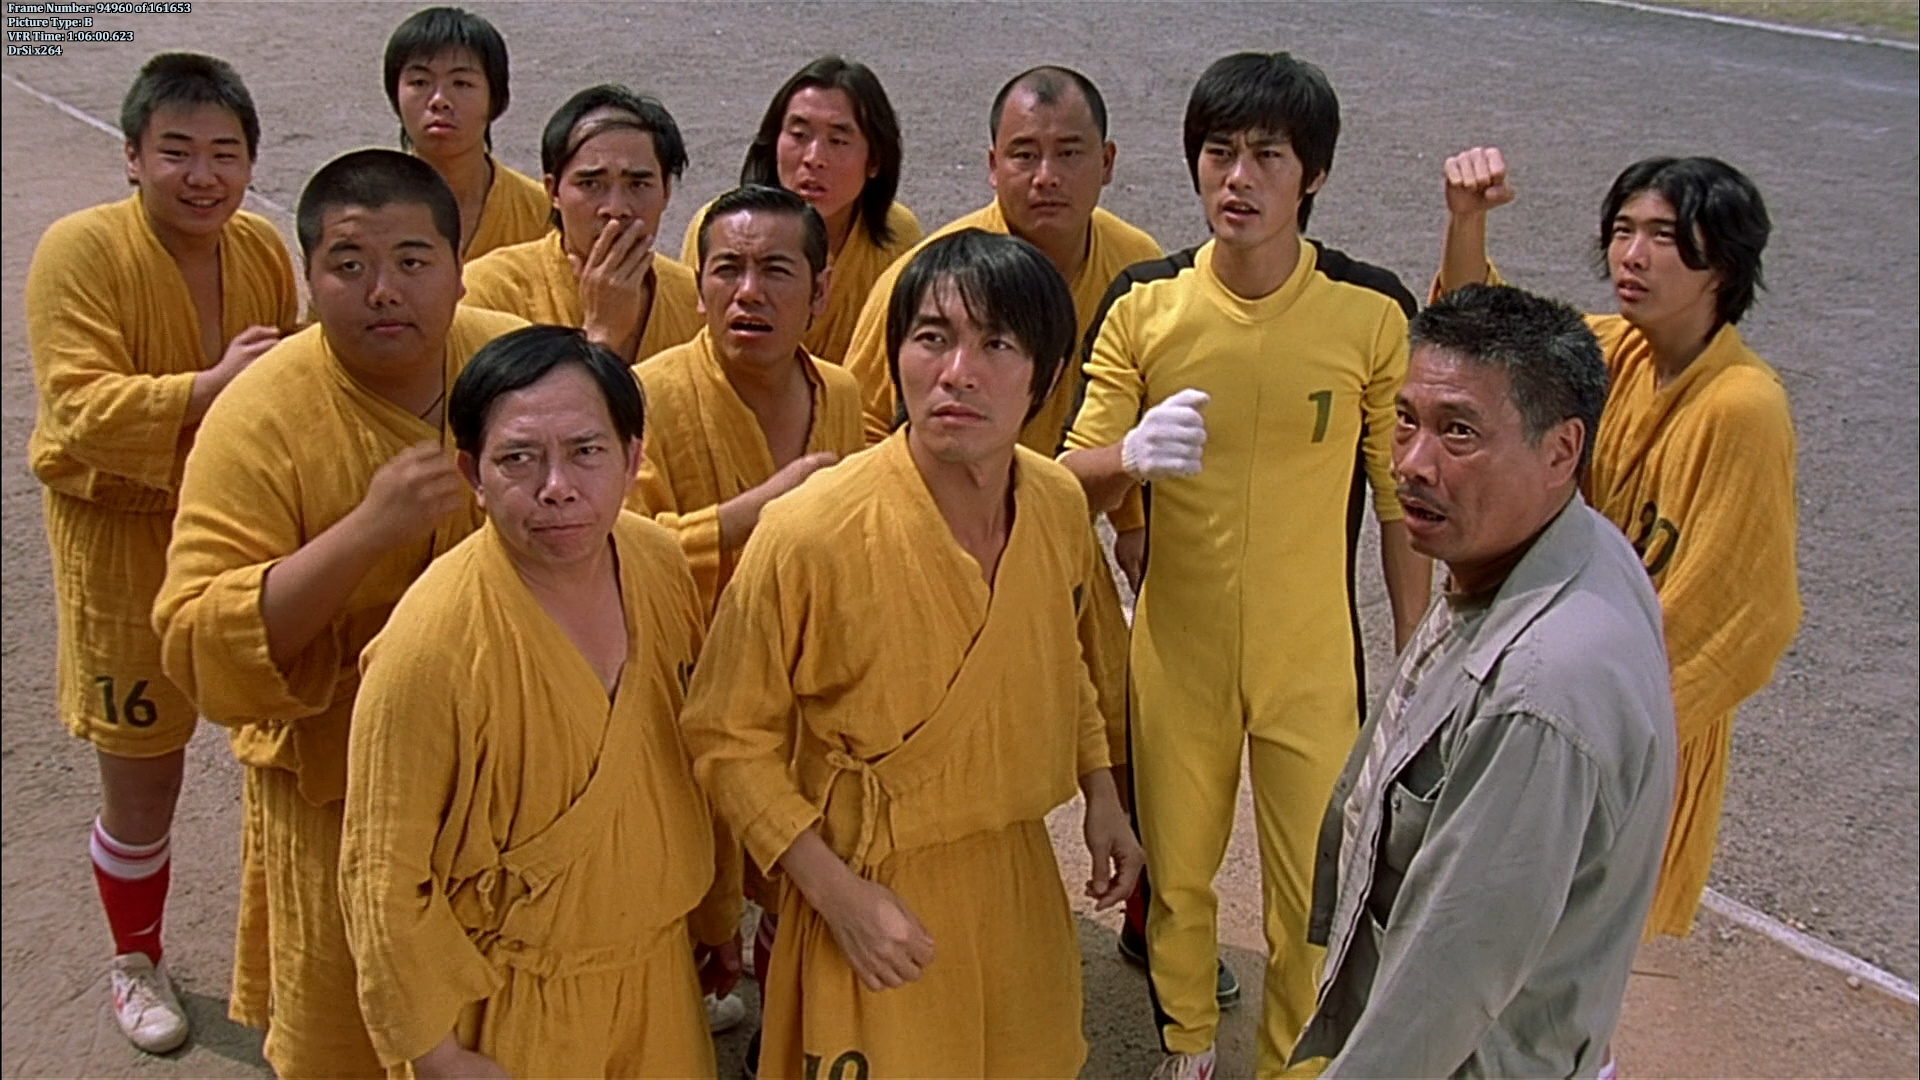 Shaolin Soccer: A squad of Sing's former monk brothers inspired by the big-money prize in a national football competition. 1920x1080 Full HD Background.